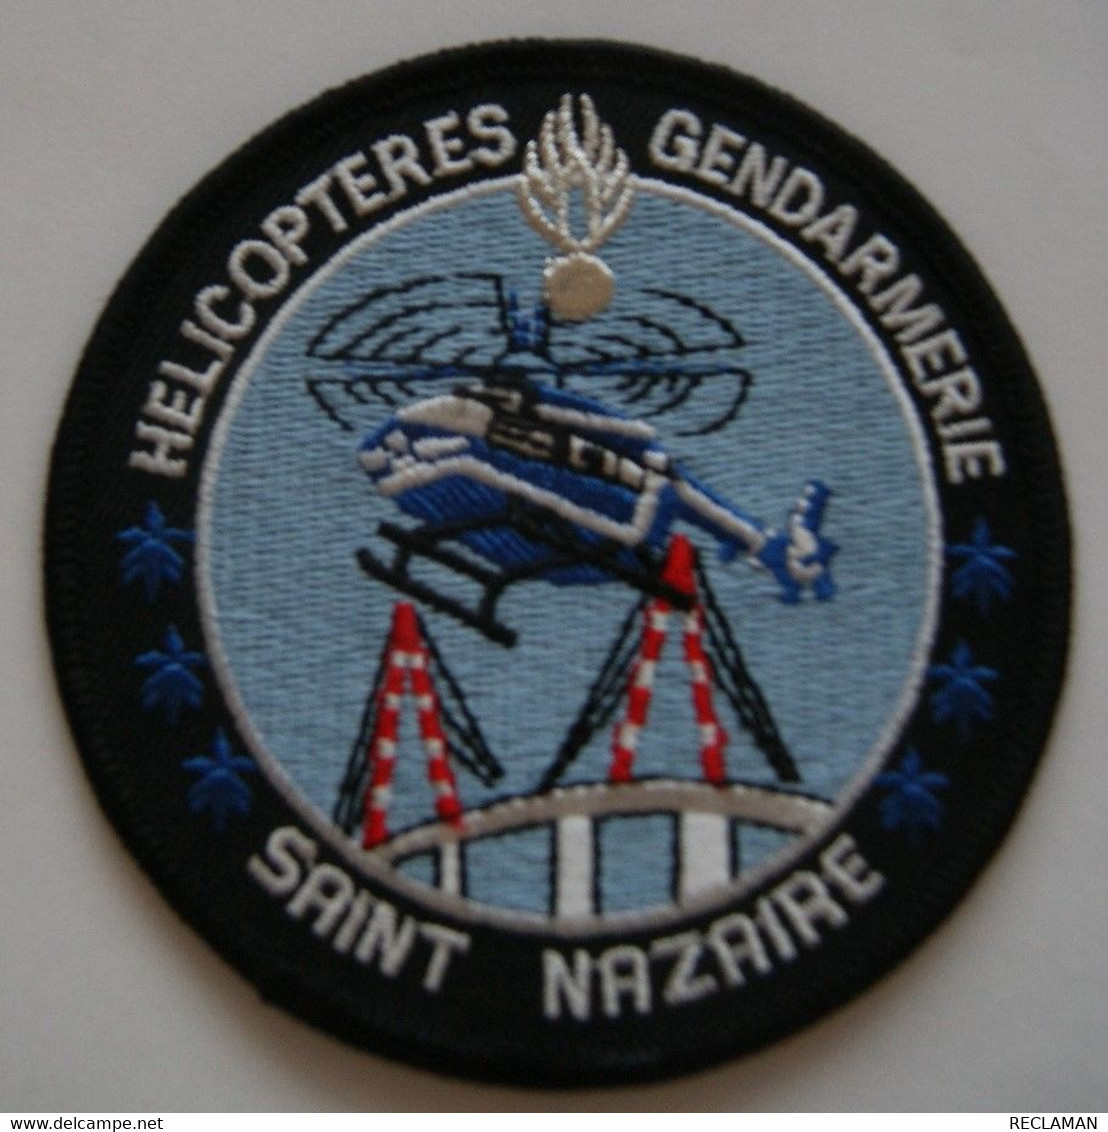 PATCH ECUSSON INSIGNE TISSUS HELICOPTERES GENDARMERIE SAINT NAZAIRE HELICOPTERE VERSION 1 - Policia